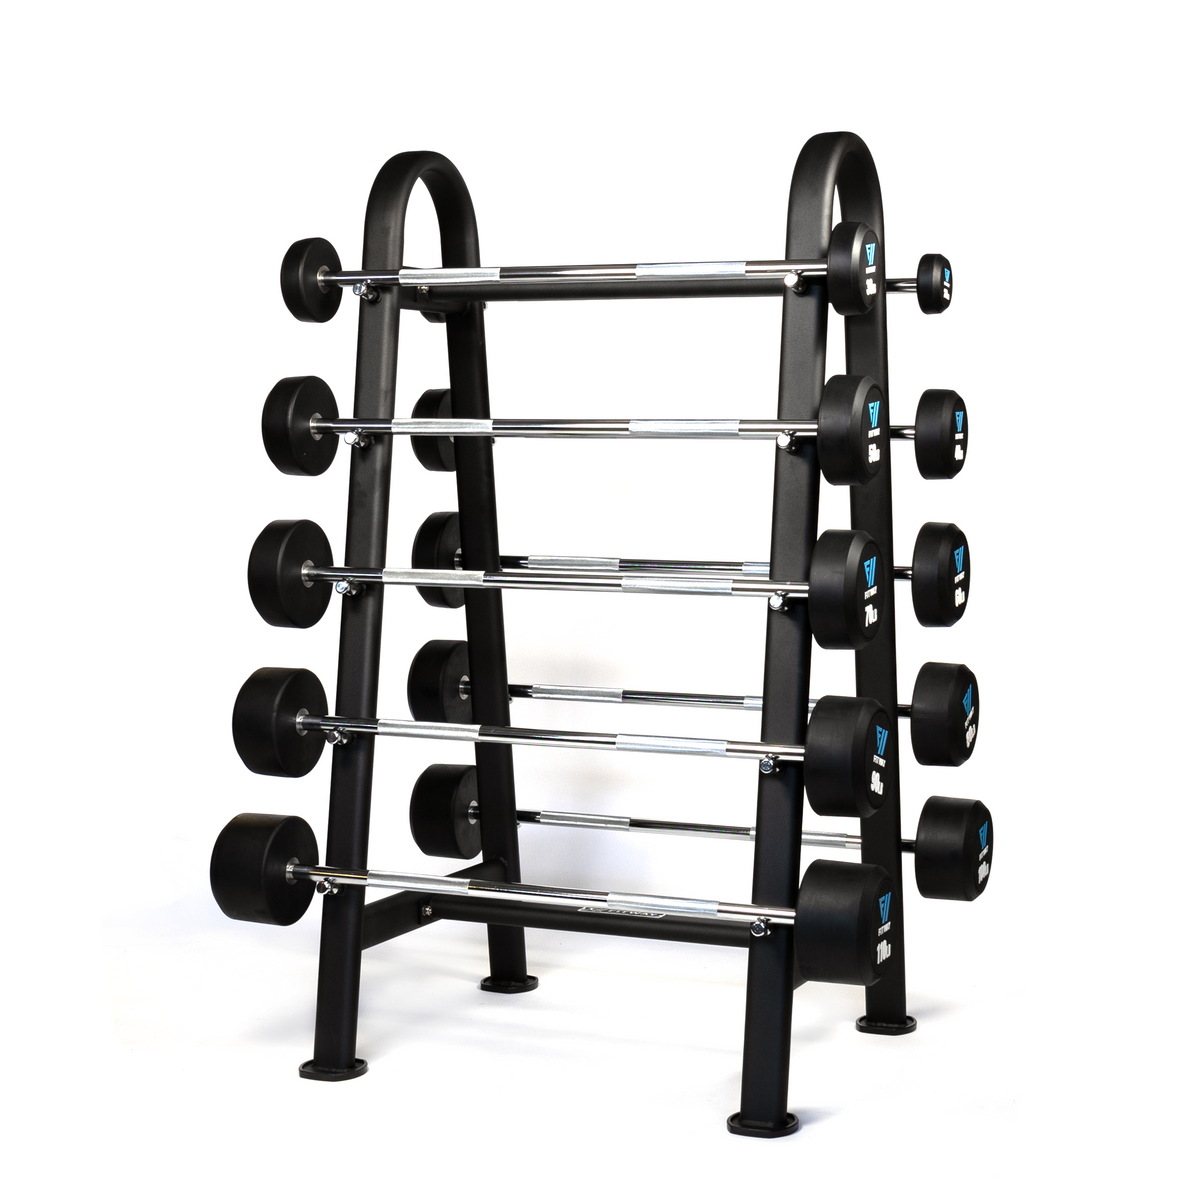 FitWay Equip. Fixed Barbell Rack